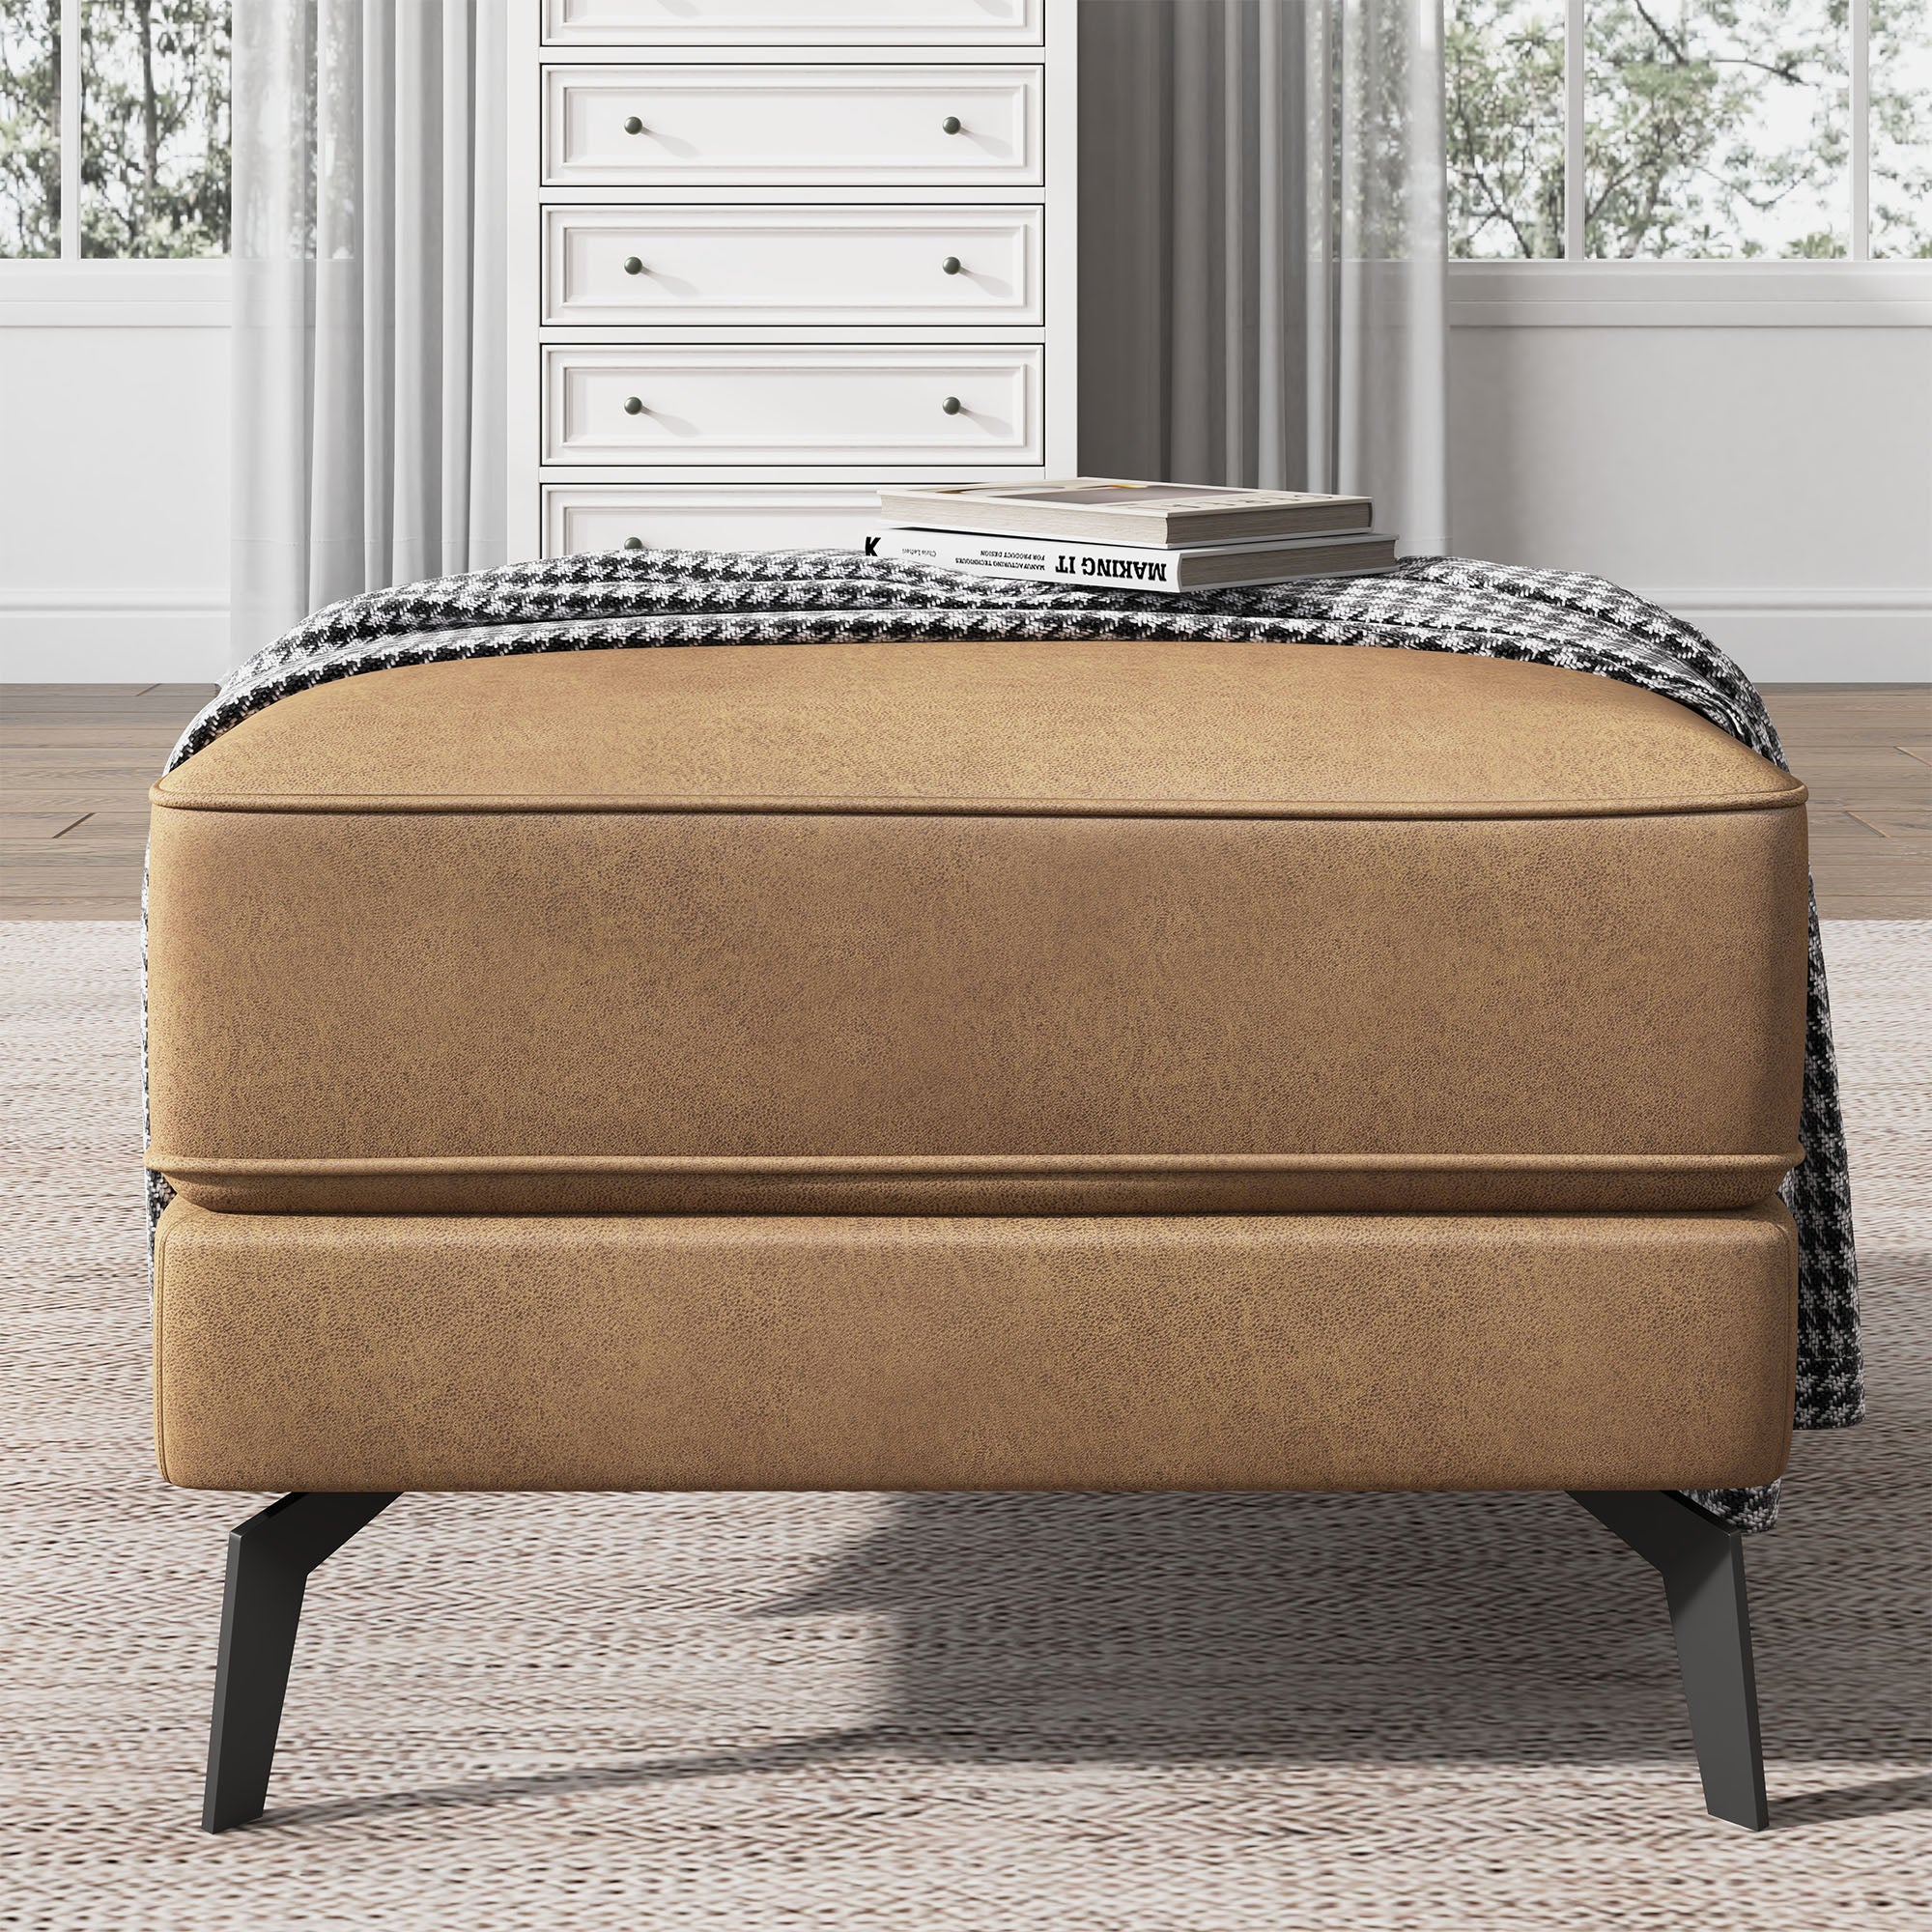 Caramel Brown Square Footstool for NOLANY Faux Leather Armchair/Loveseat